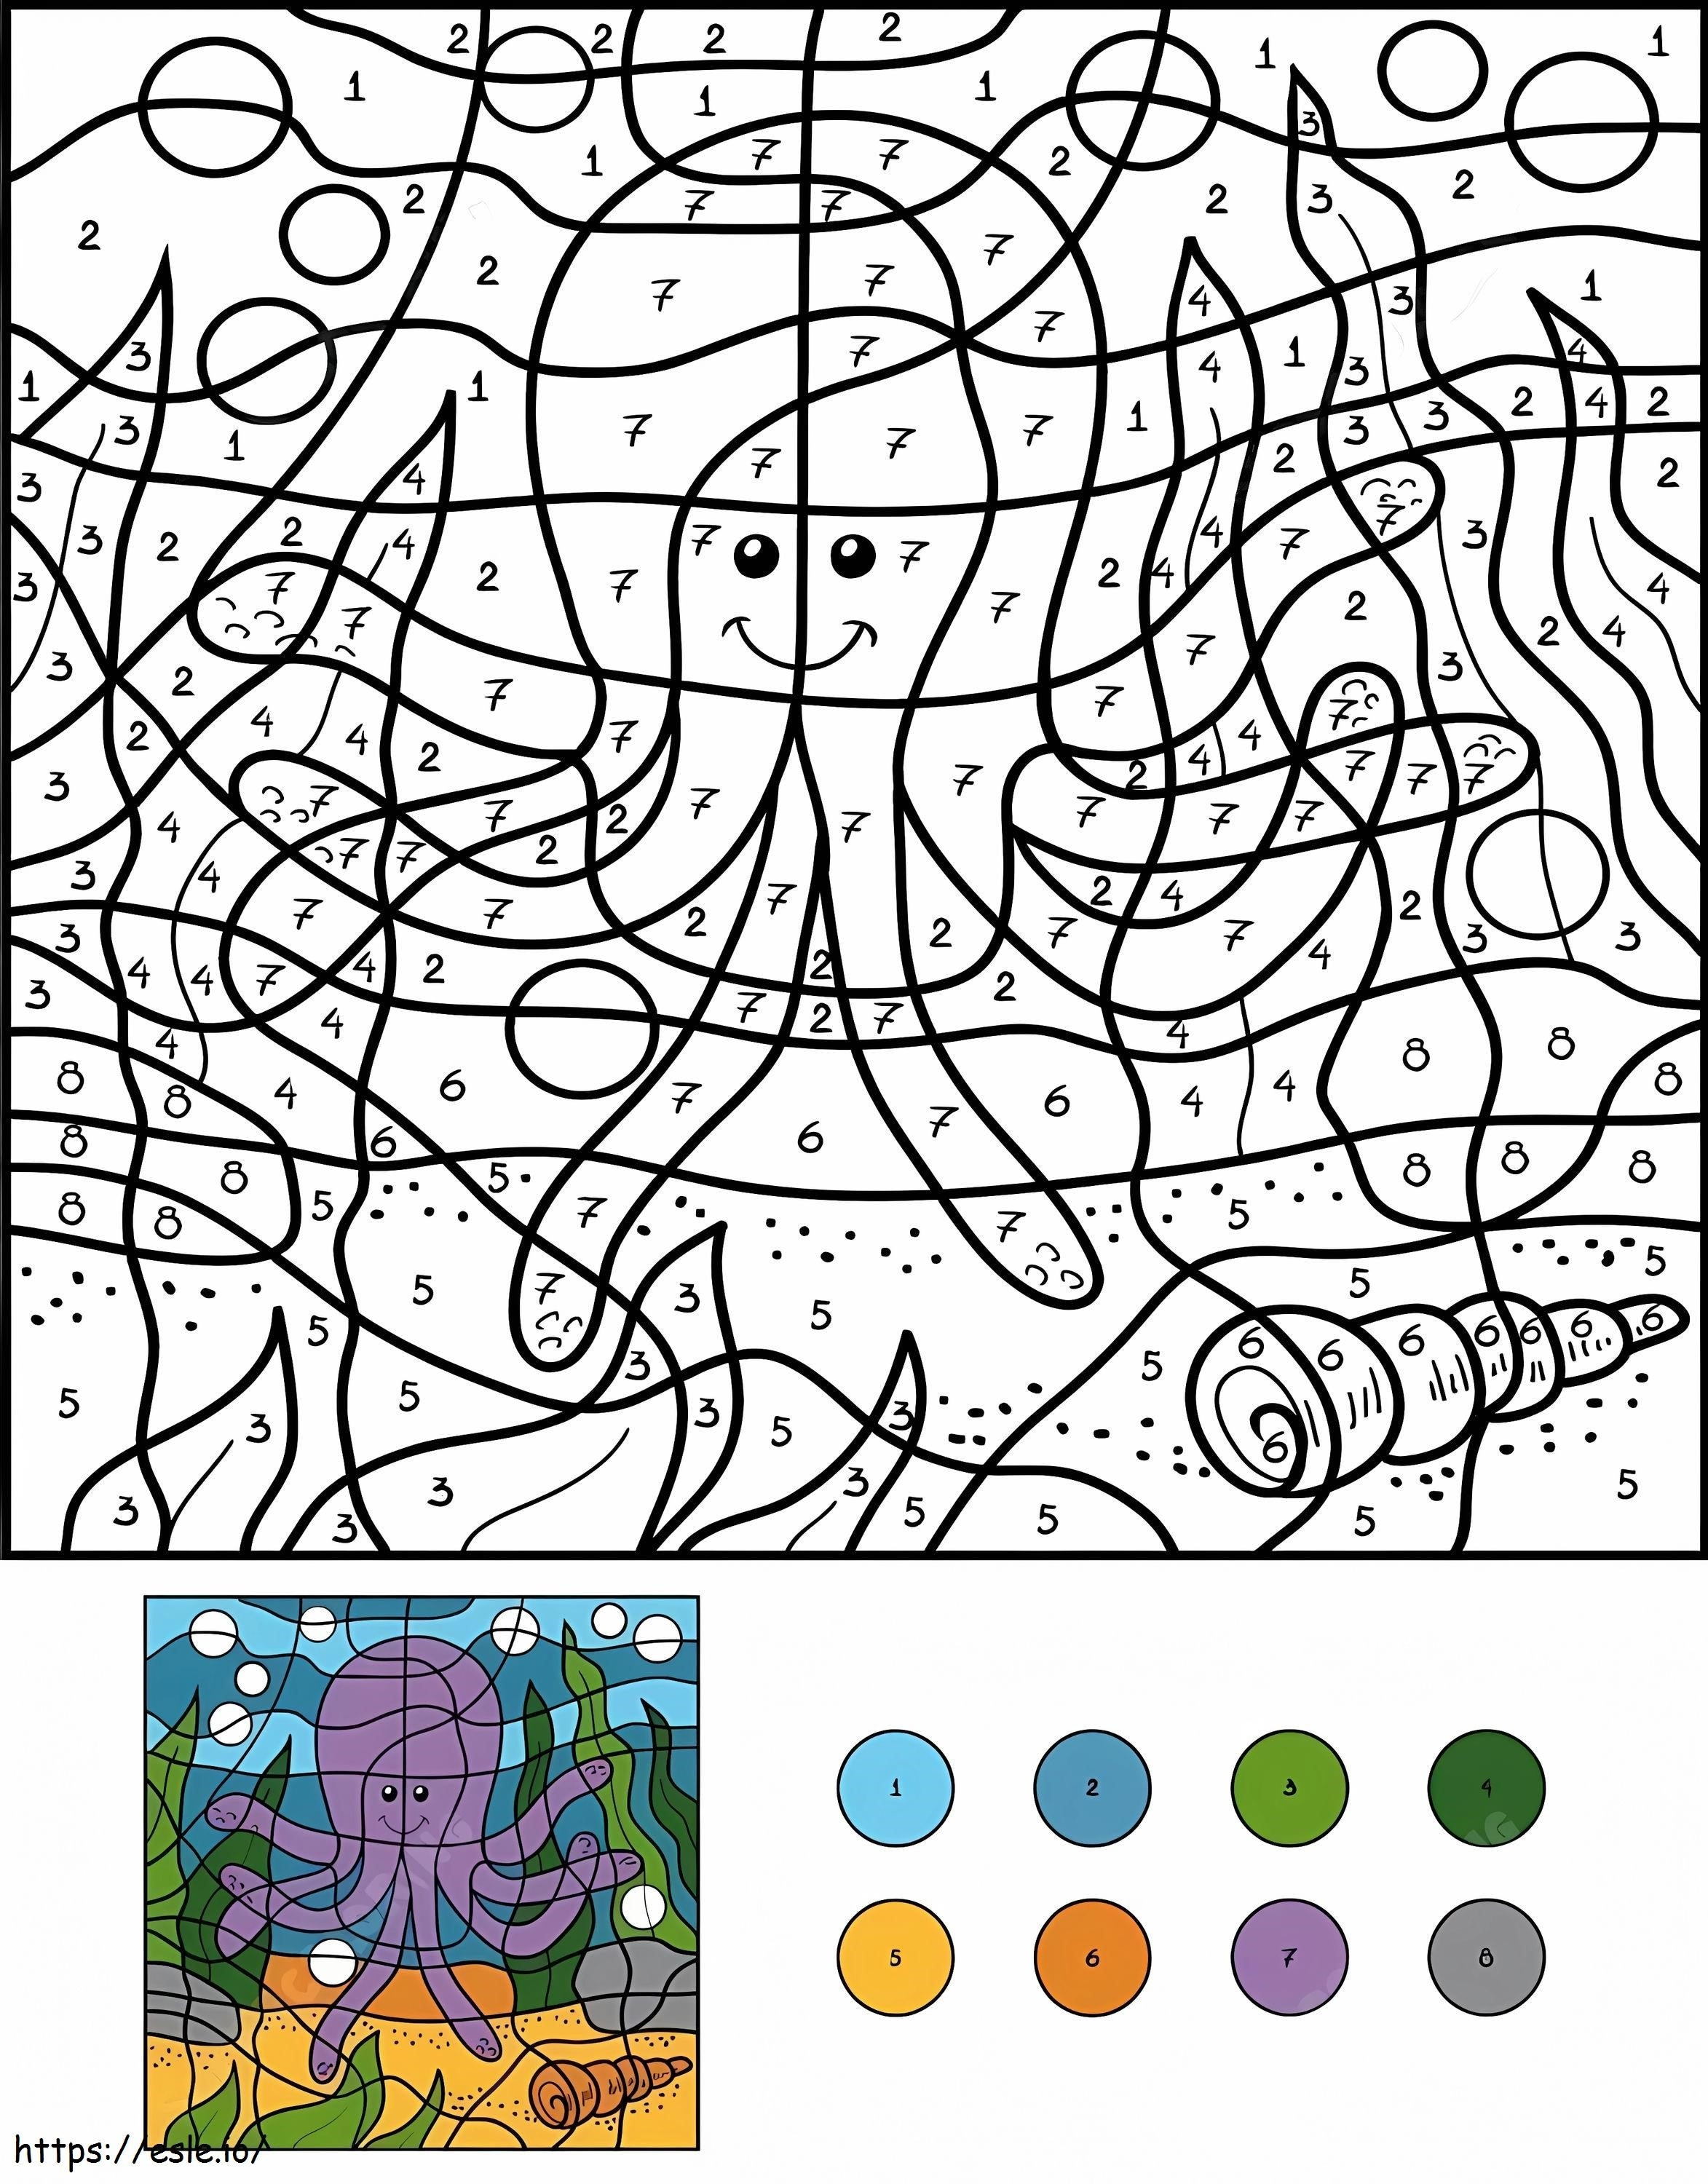 Octopus Color By Number coloring page